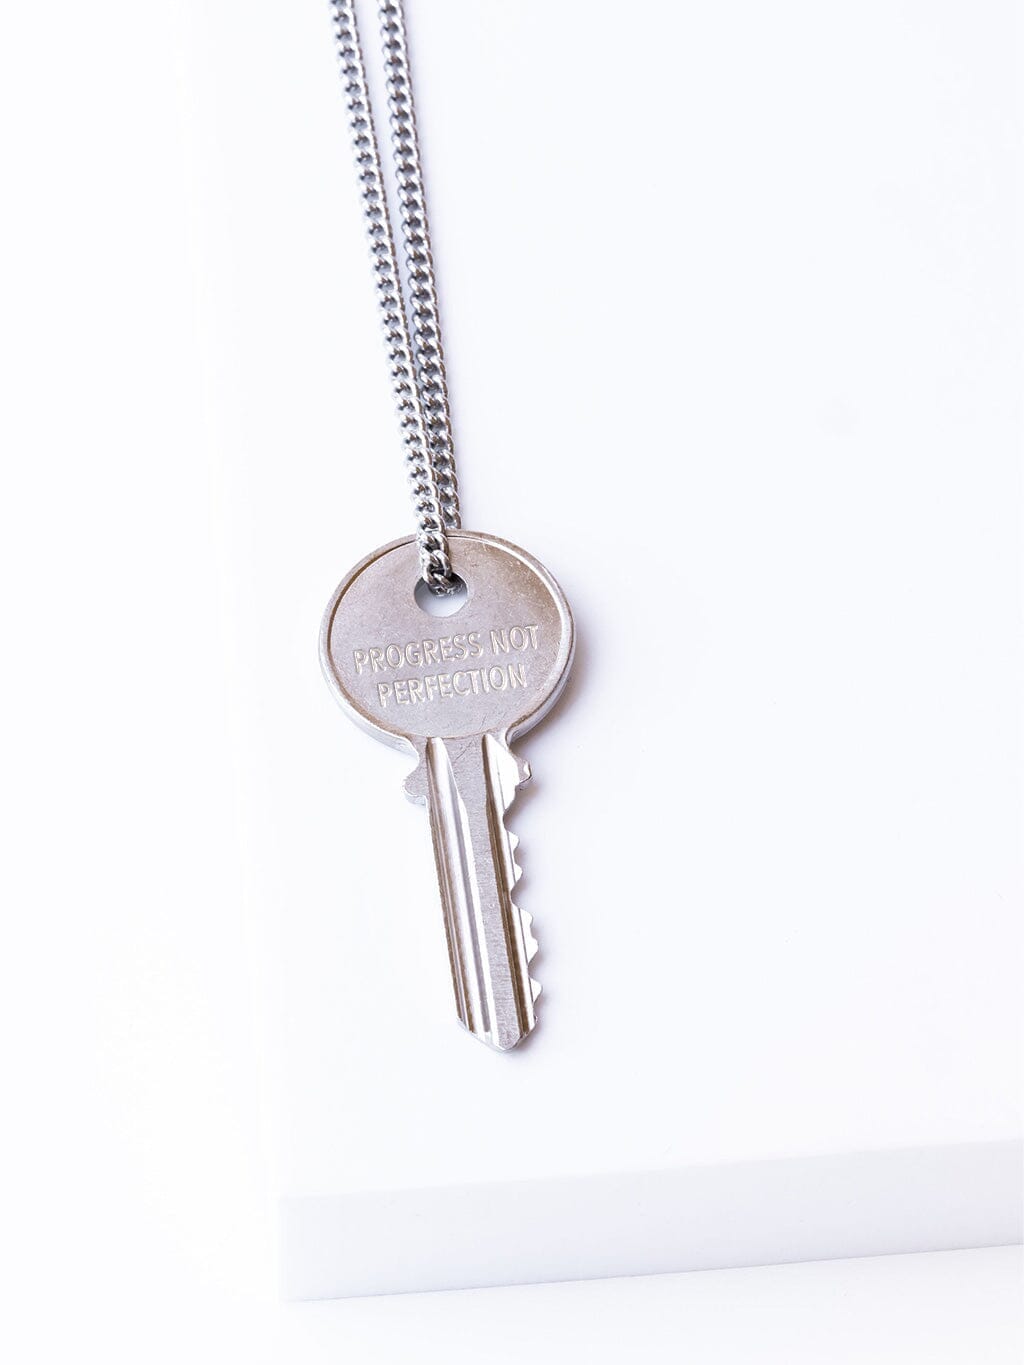 N - Love Your Flawz Classic Key Necklace Necklaces The Giving Keys 